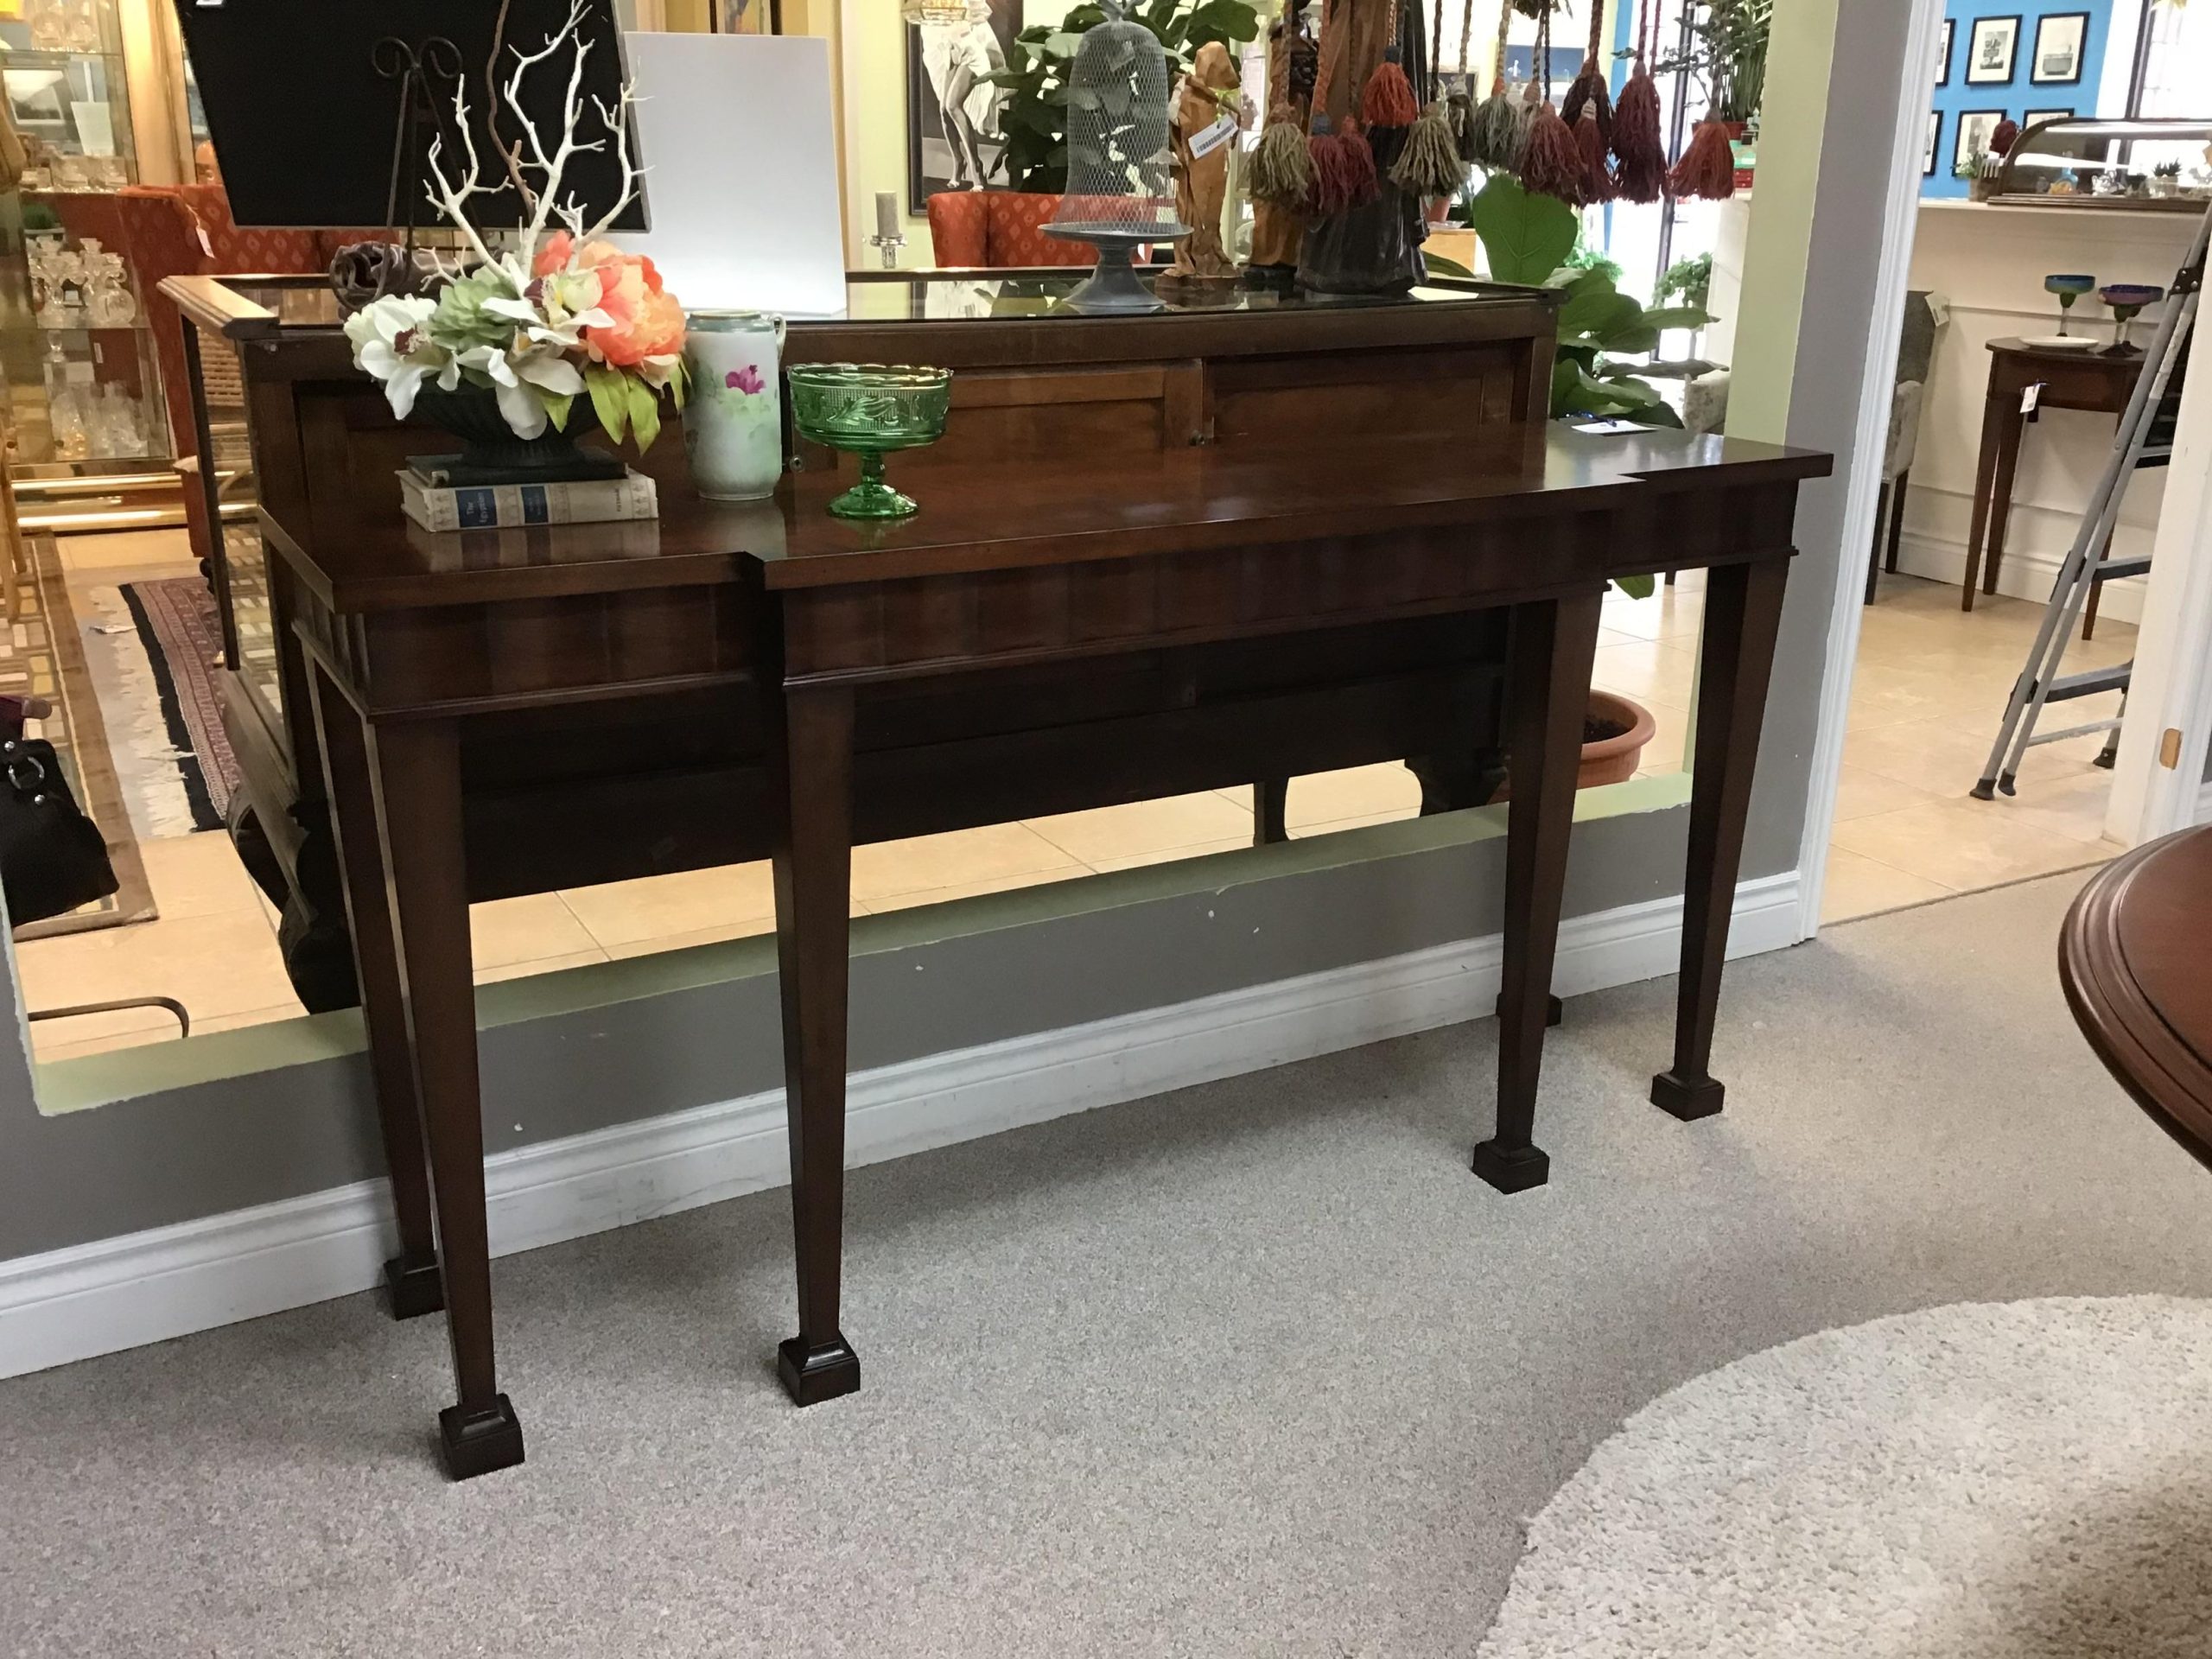 Long Drk. Burled Wood Console Table